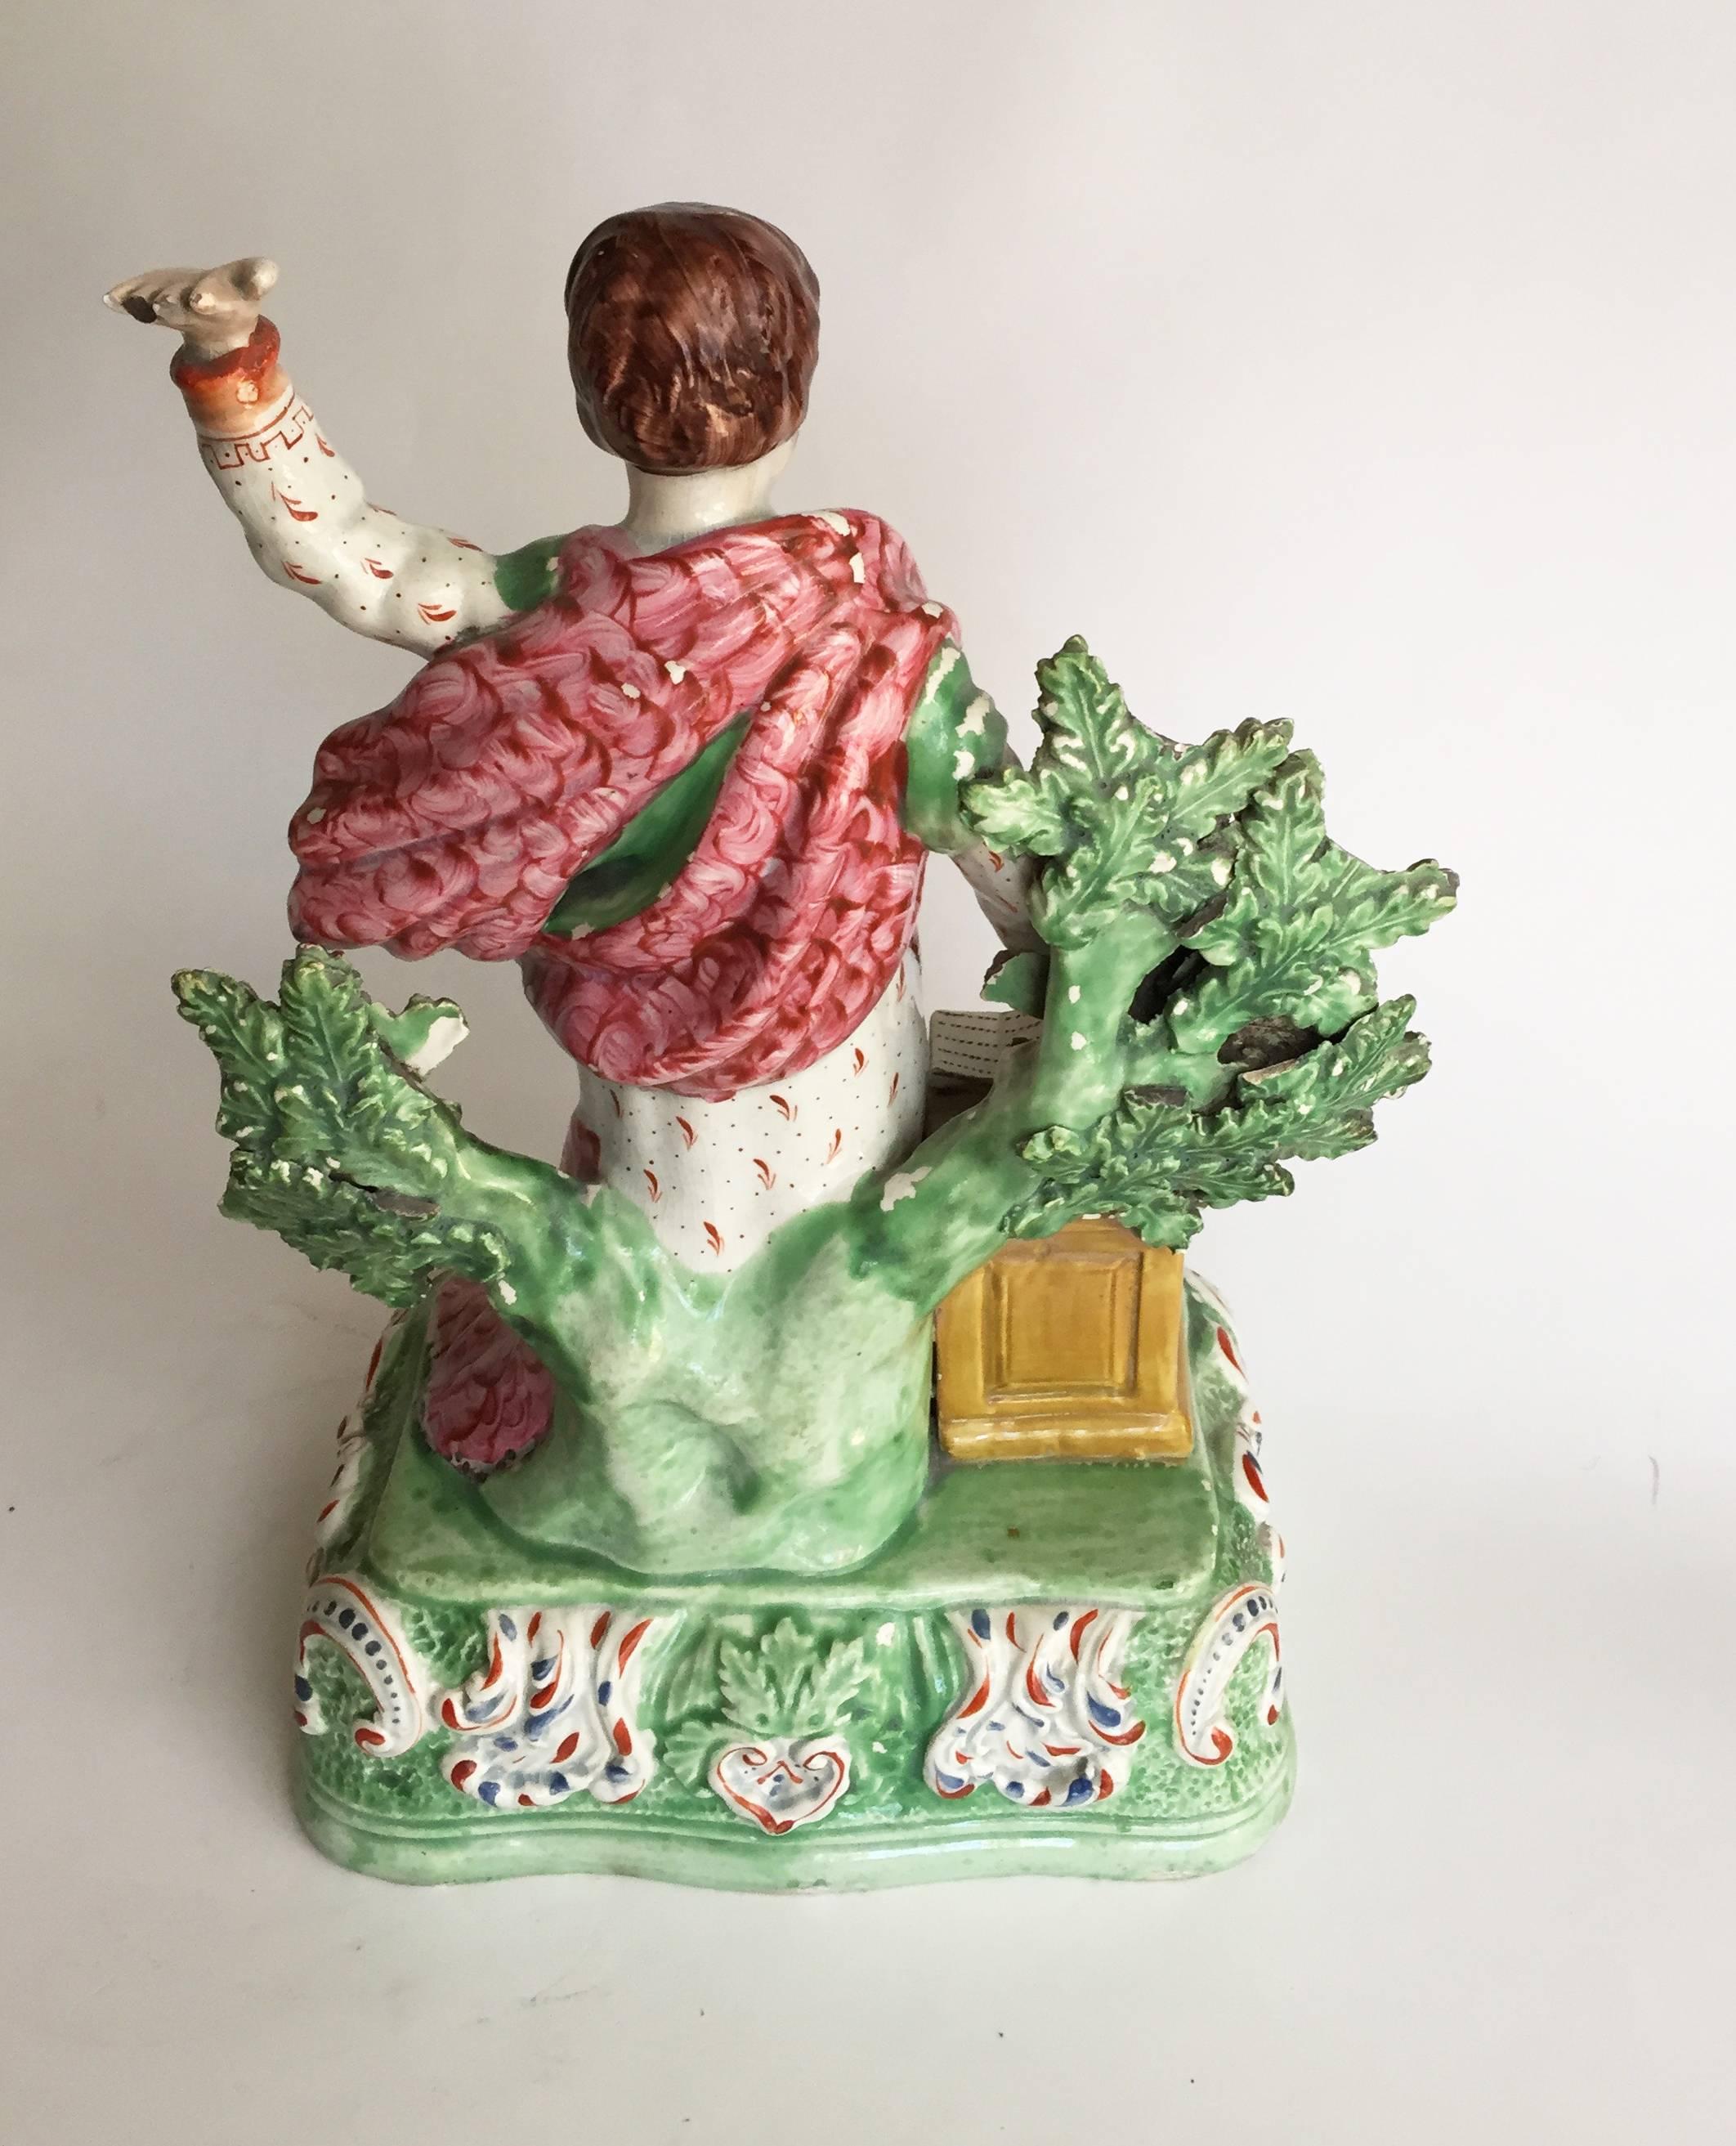 English Staffordshire pottery “Patriotic Group” figure of Jeremiah Preaching, with bocage in the background on a raised, rounded rectangular table base molded with scrolls and foliate patterns, Jesus standing near a large open testament or Bible.